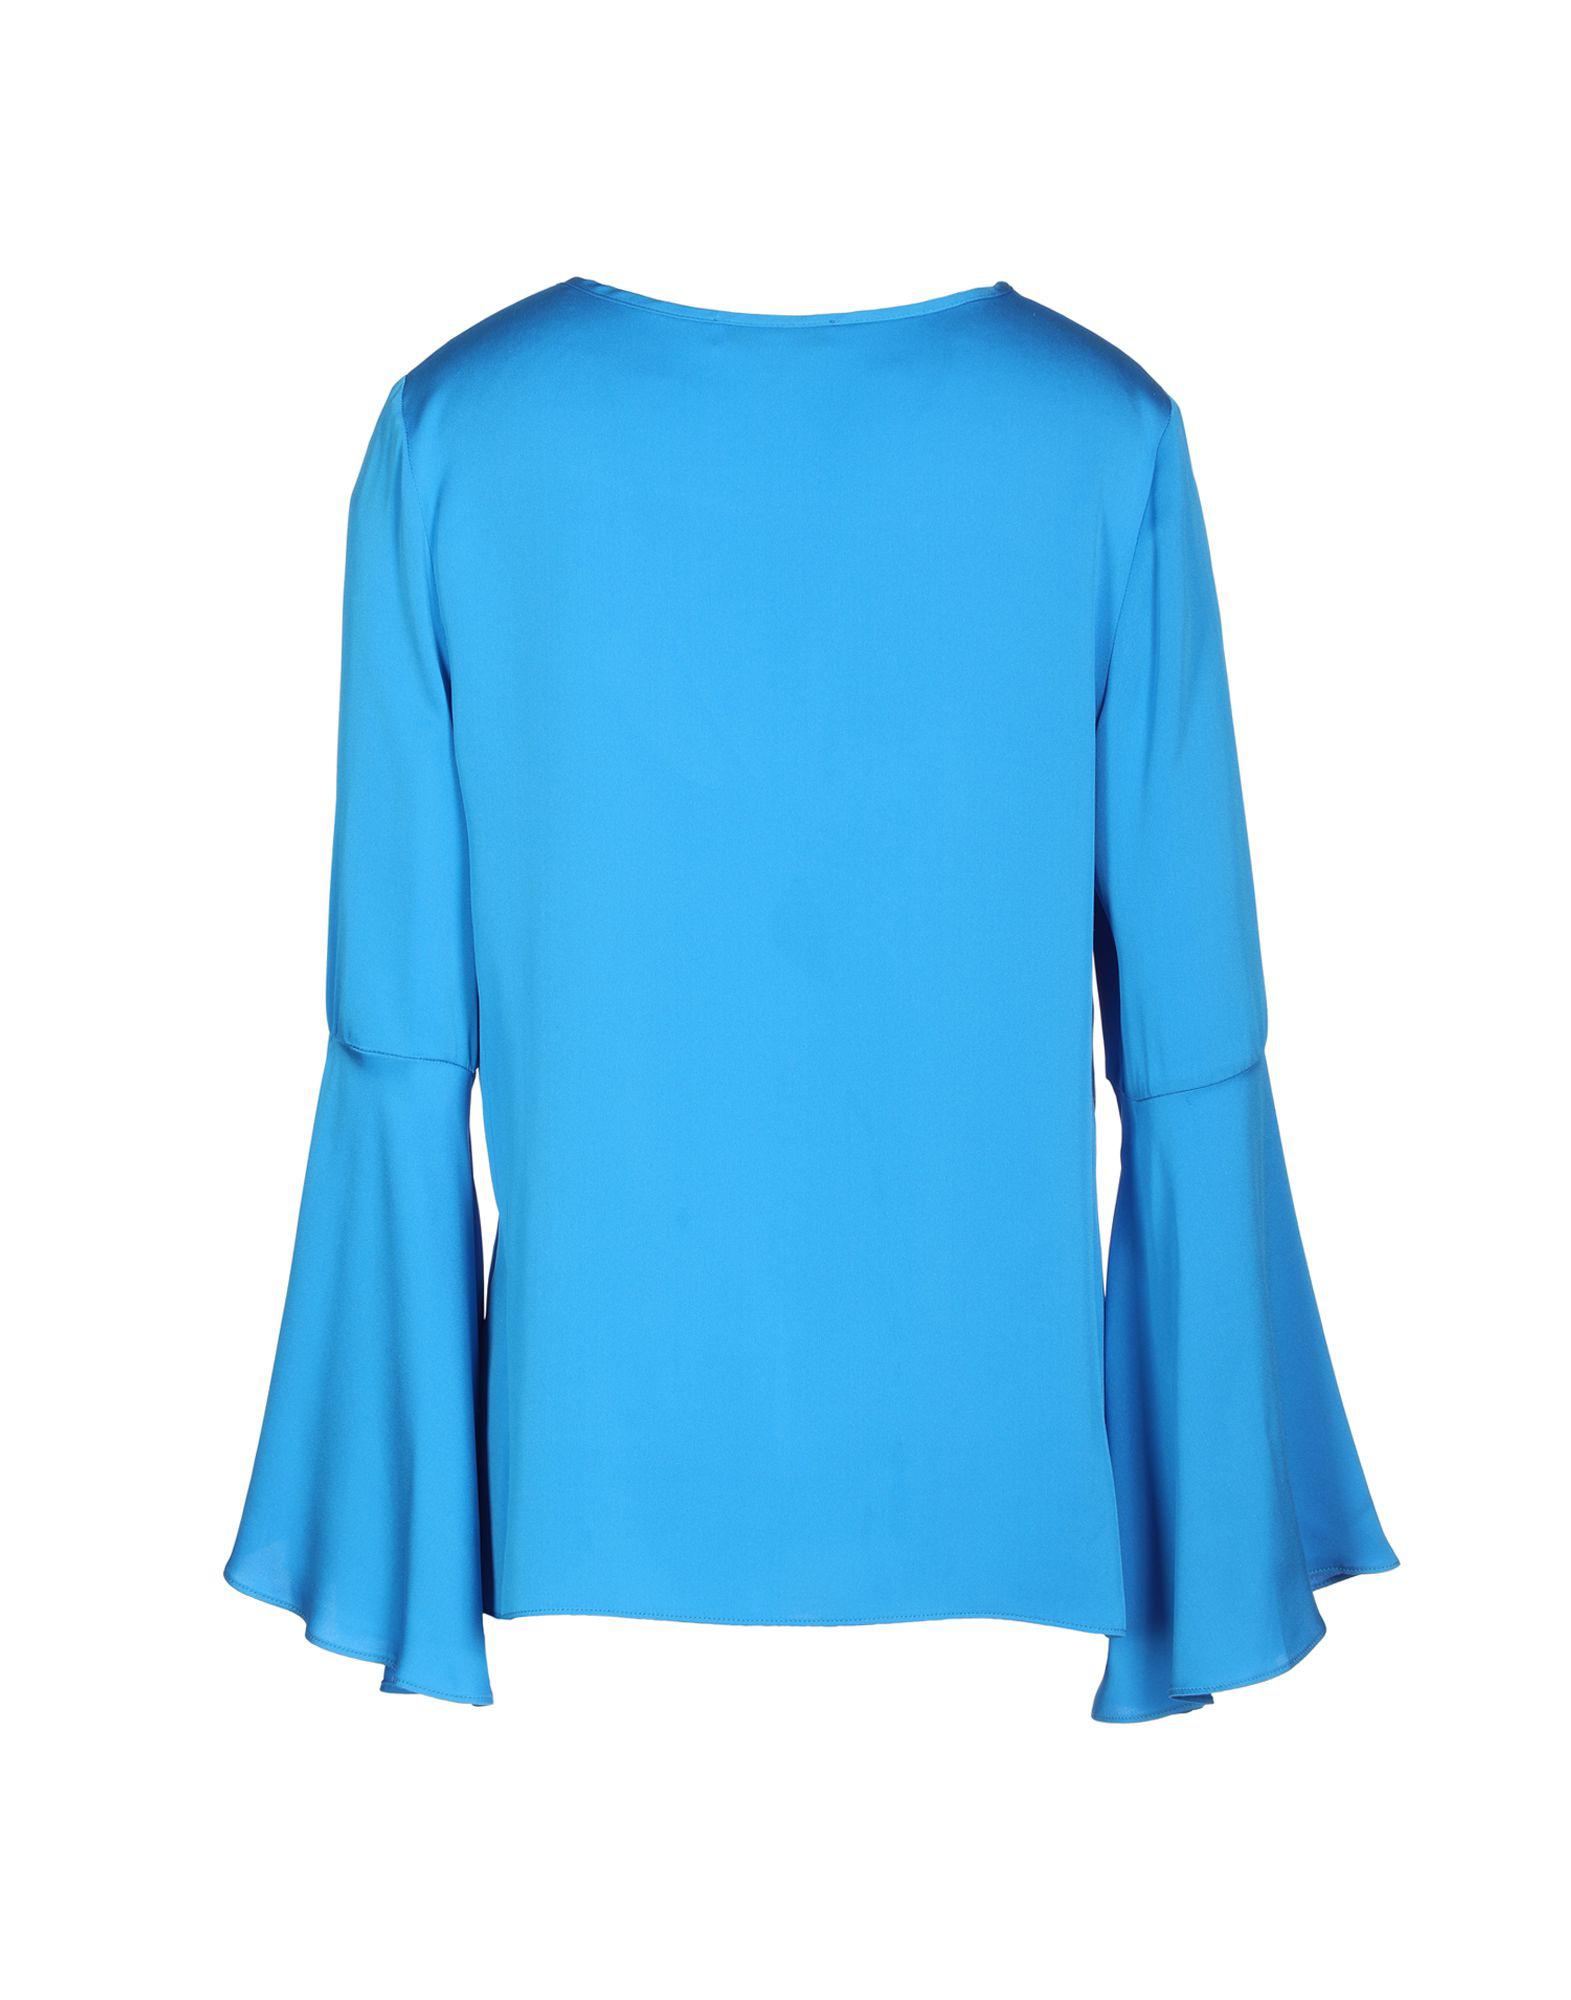 MILLY Silk Blouse in Bright Blue (Blue) - Lyst